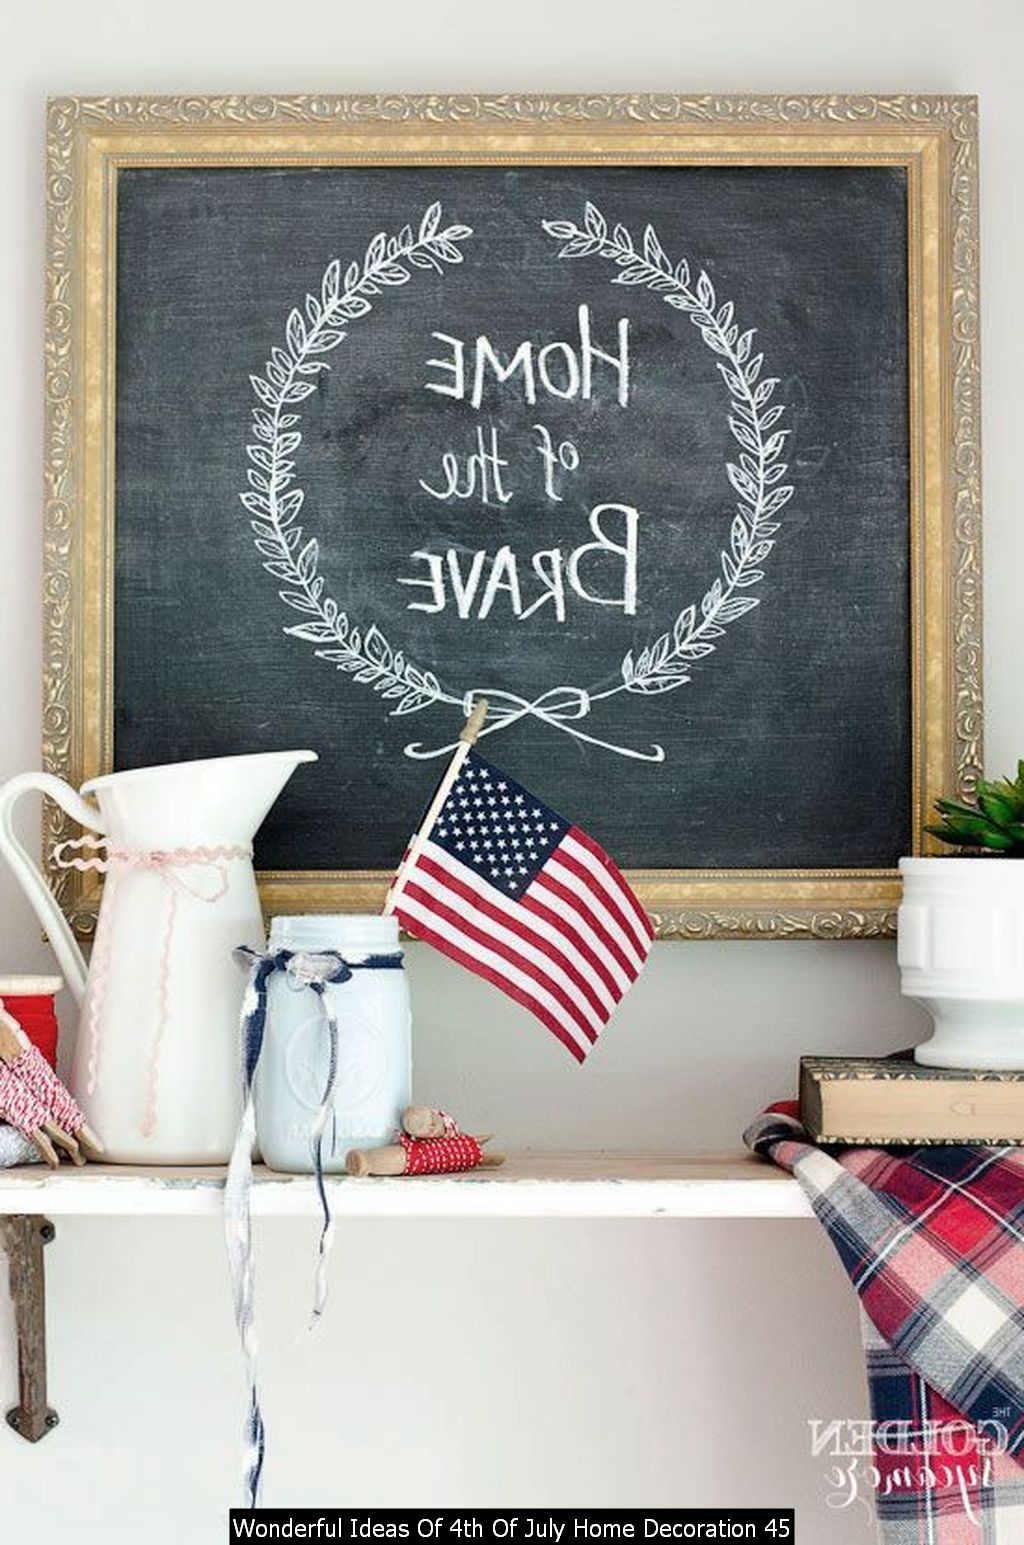 Wonderful Ideas Of 4th Of July Home Decoration 45